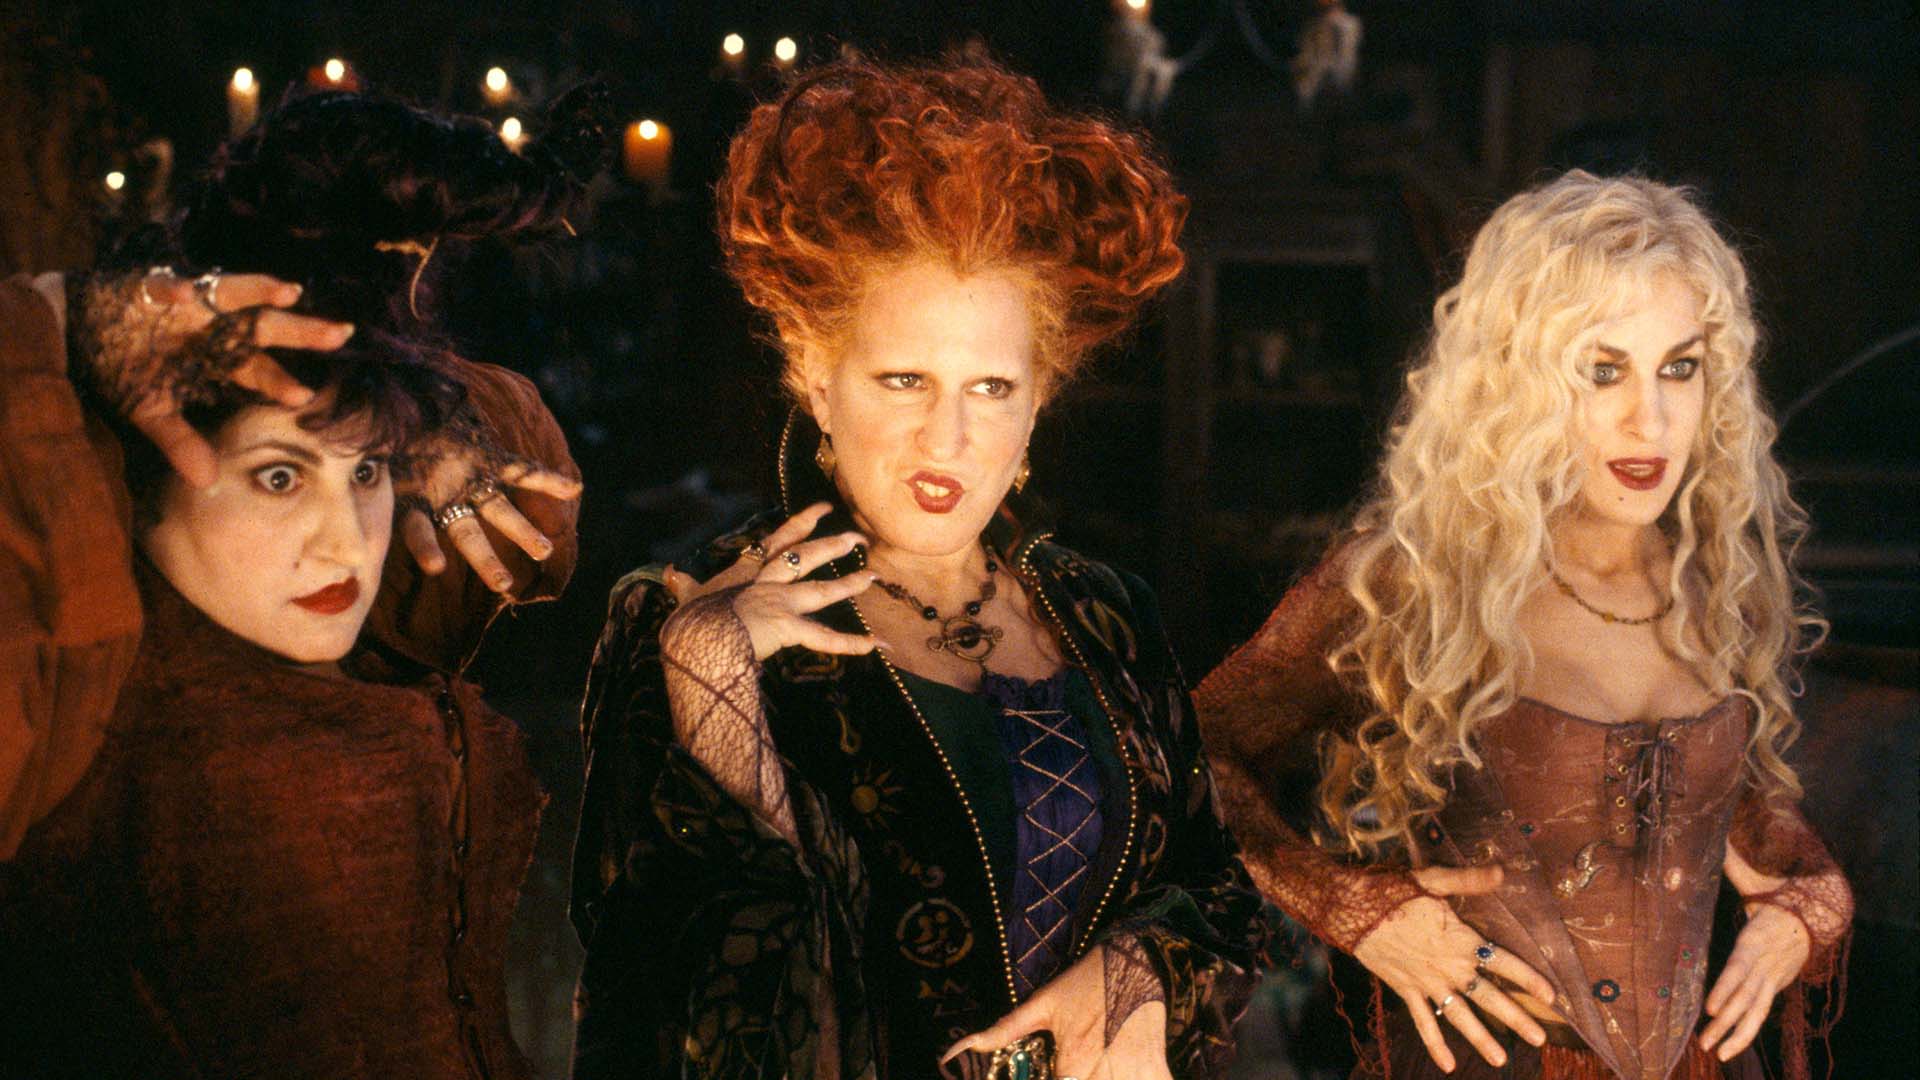 'The Nightmare Before Christmas' and 'Hocus Pocus' Are Returning to Cinemas for Their 30th Anniversaries